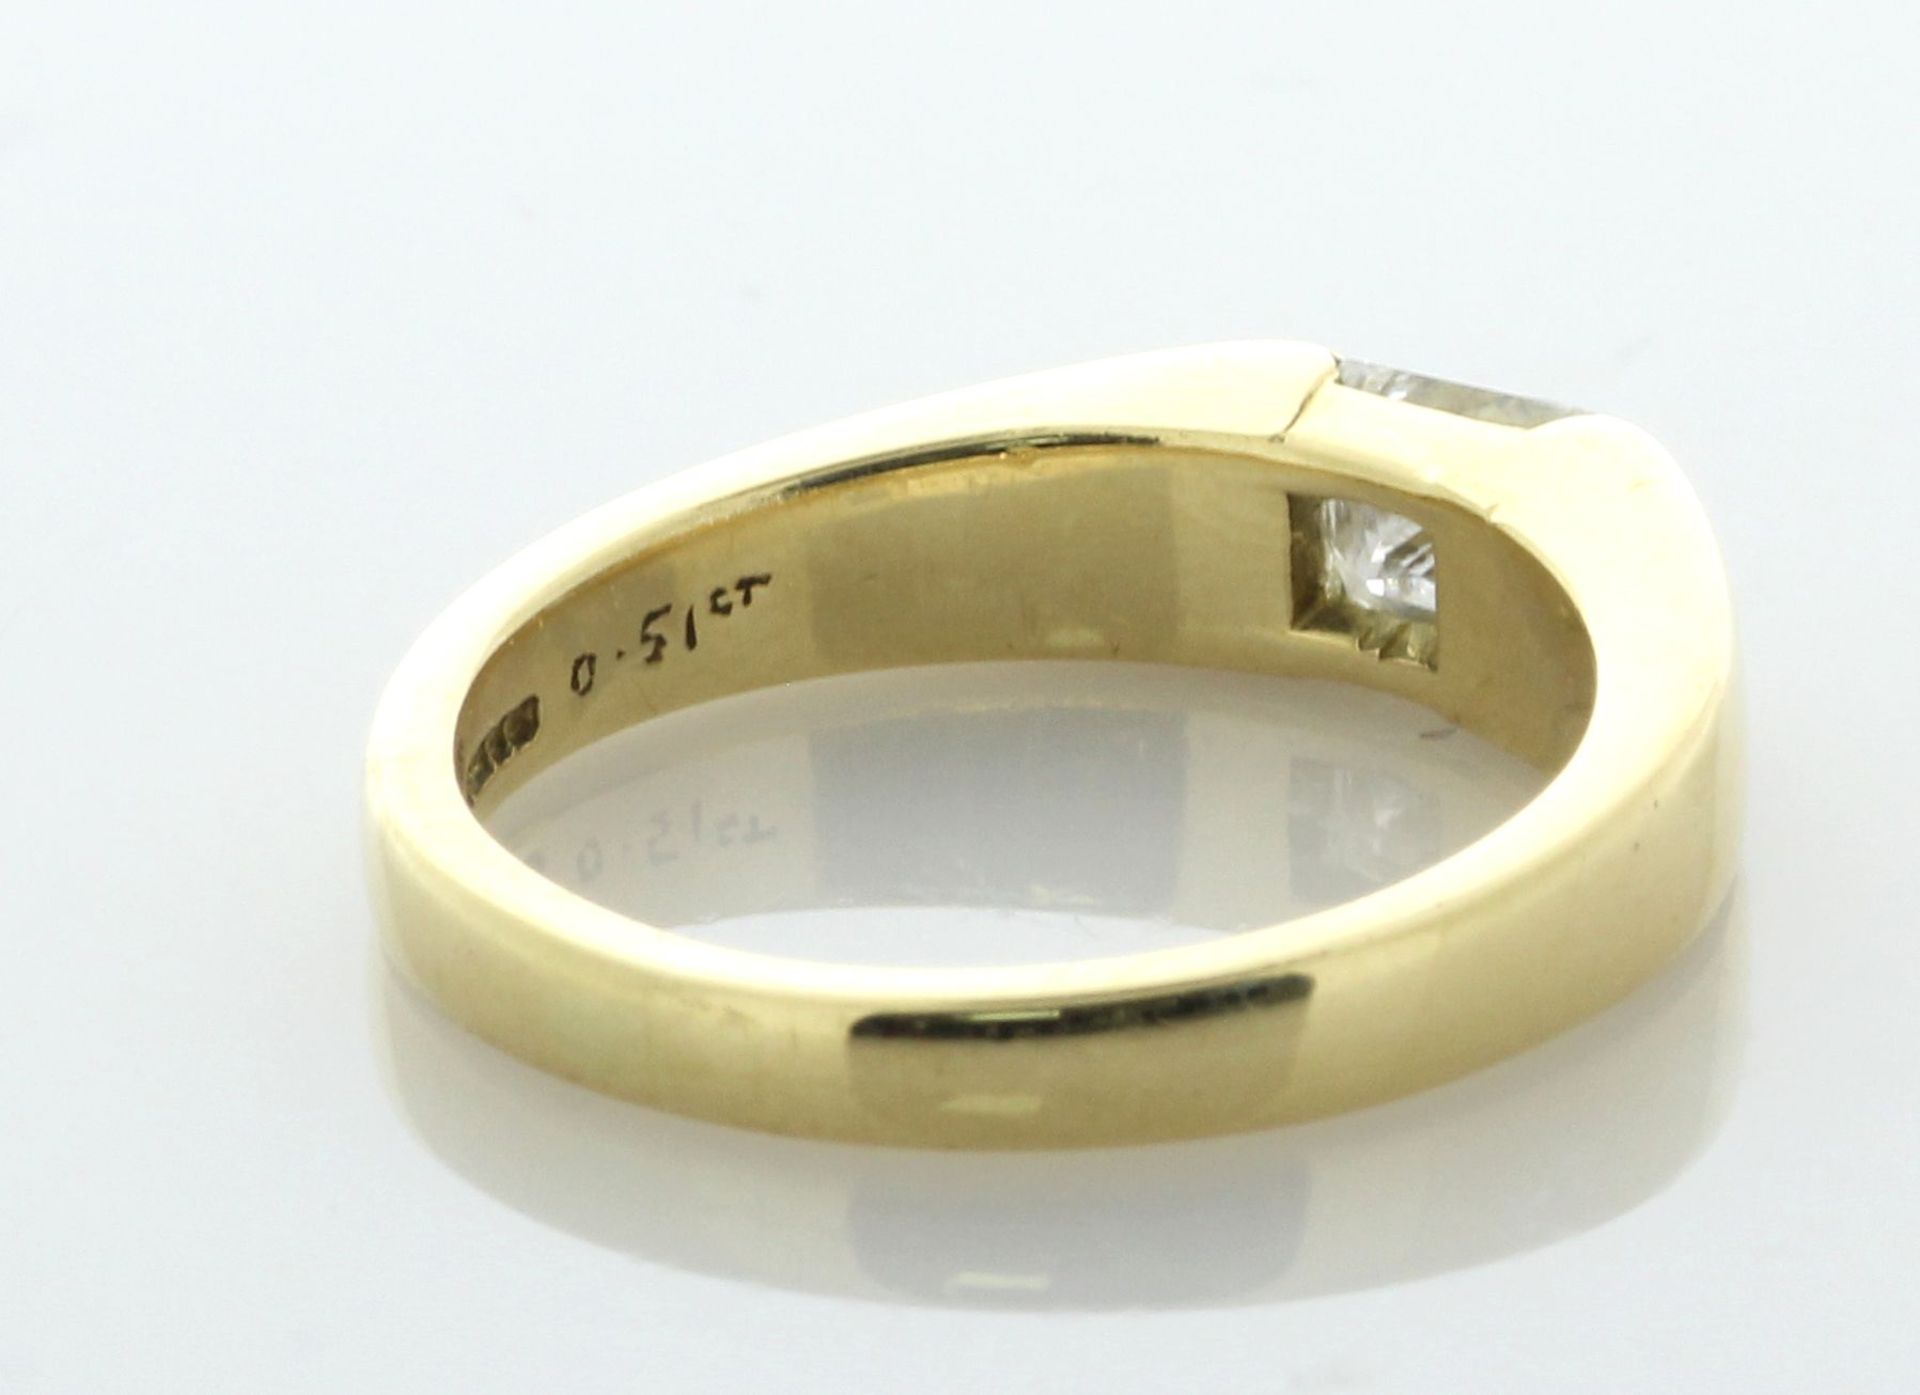 18ct Yellow Gold BOODLES Princess Cut Diamond Ring 0.51 Carats - Valued By AGI £5,100.00 - - Image 4 of 7